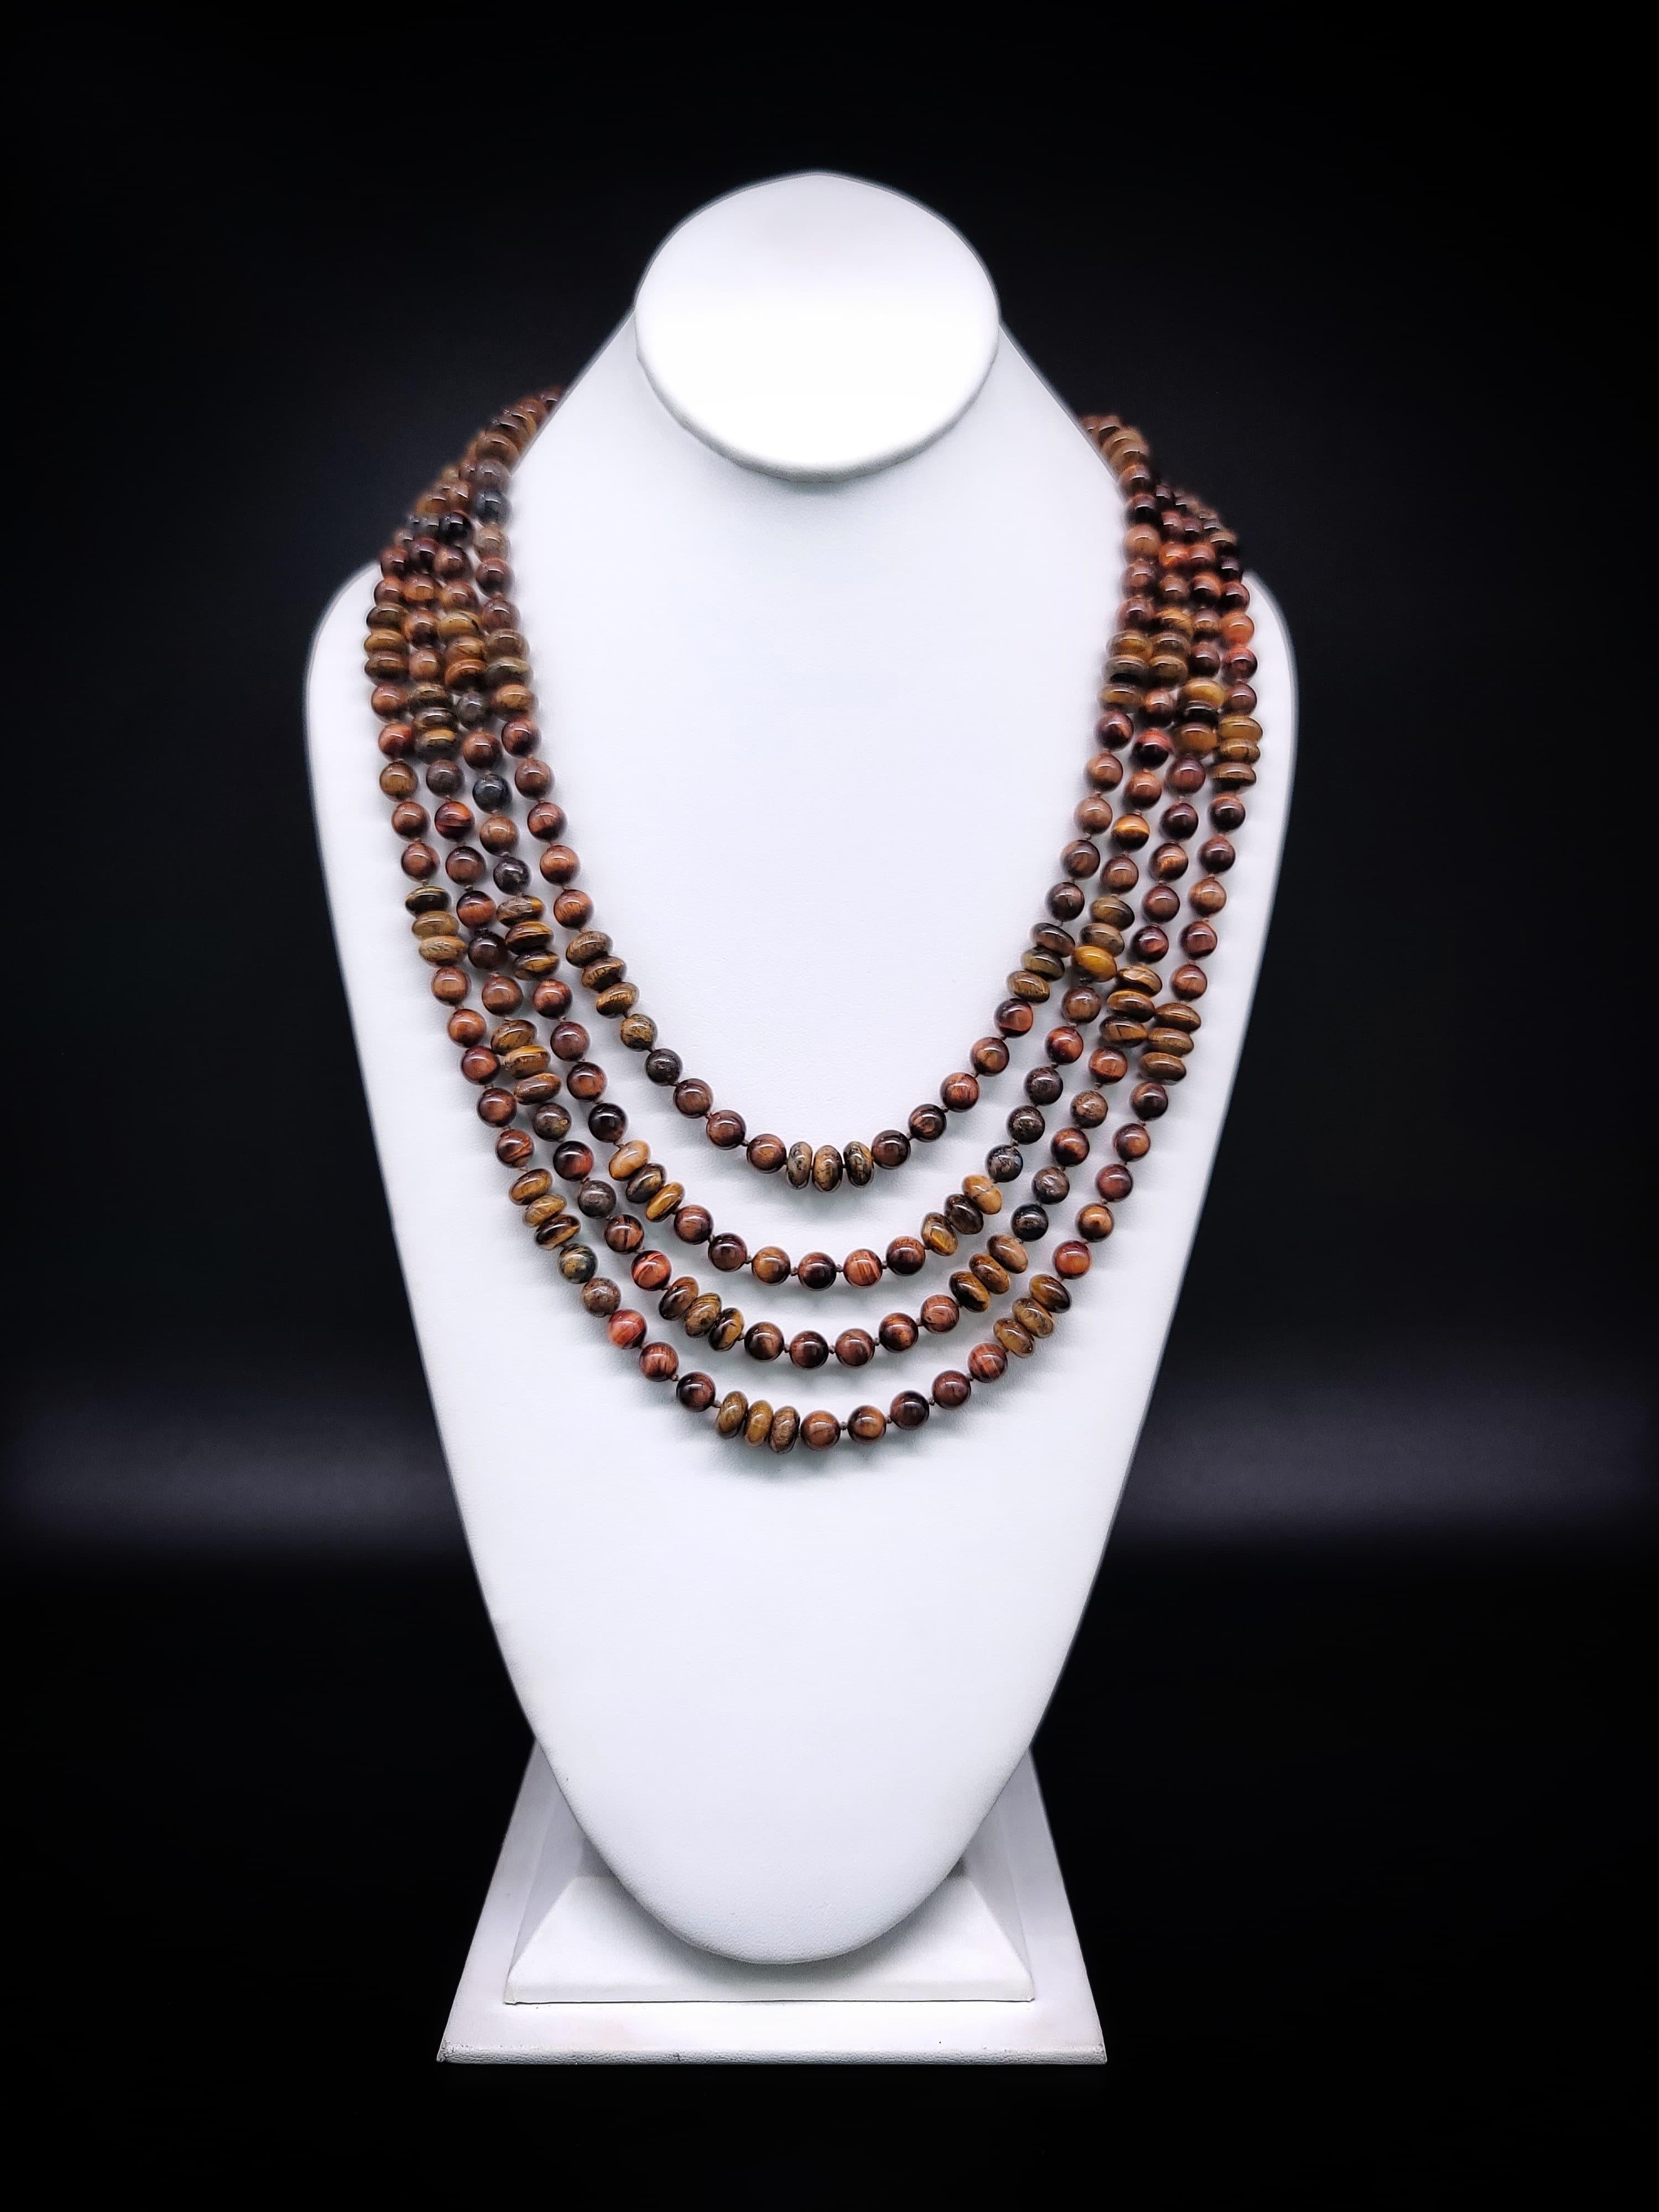 One-of-a-Kind

Prepare to be mesmerized by our one-of-a-kind Endlessly Intriguing and Sophisticated 4-Strand Tiger's Eye necklace. This necklace features four strands of perfectly matched Tiger's Eye beads that graduate in size from 6-8mm, creating